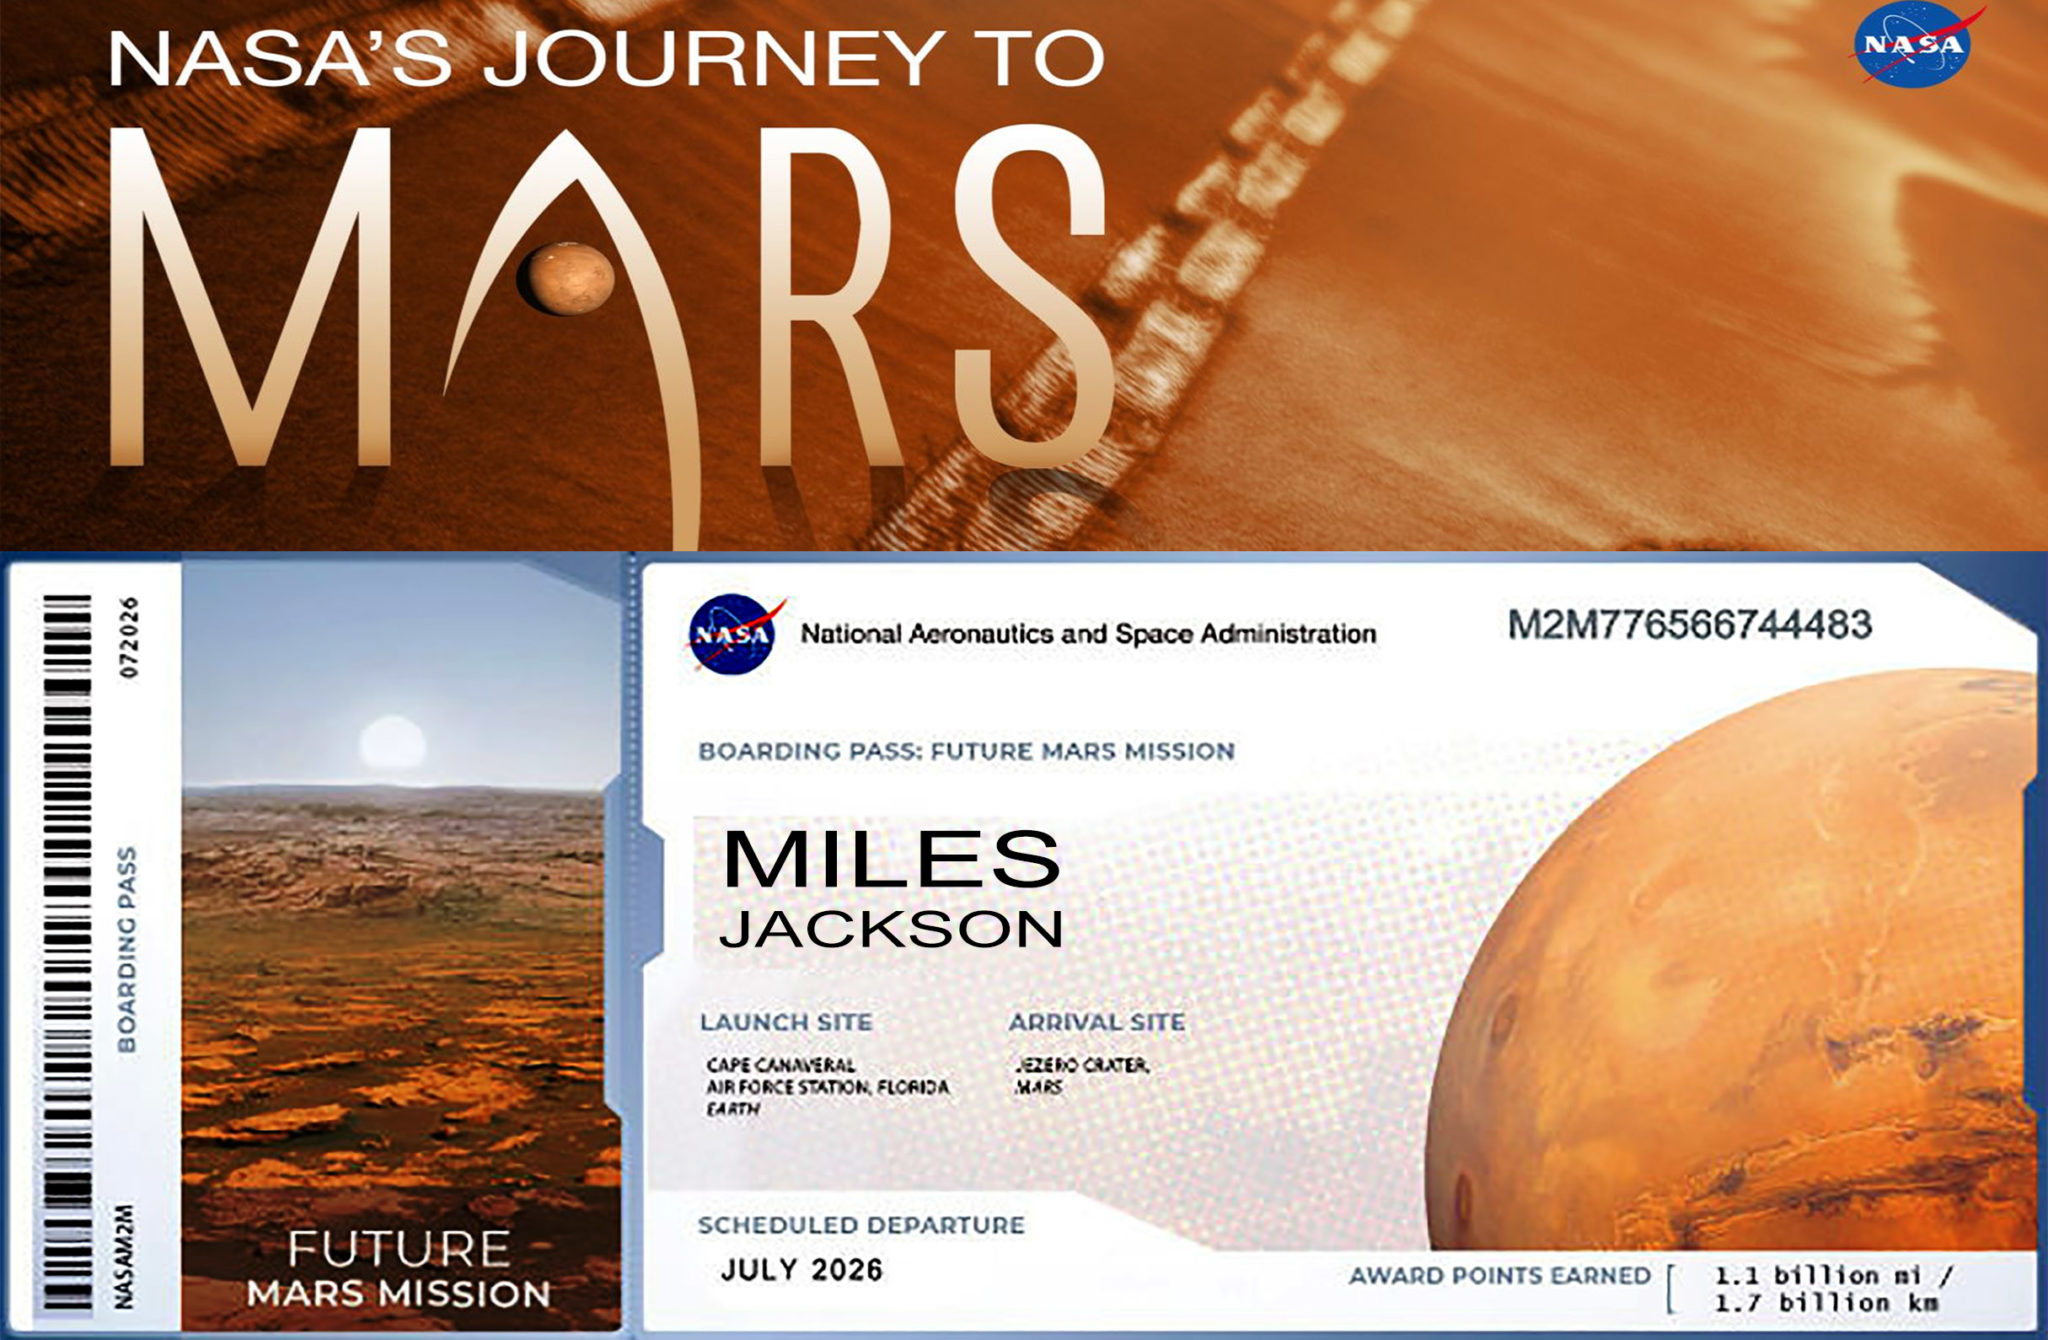 Send Your Name To Mars Get Official Nasa Boarding Pass Earn Mars Frequent Flyer Points